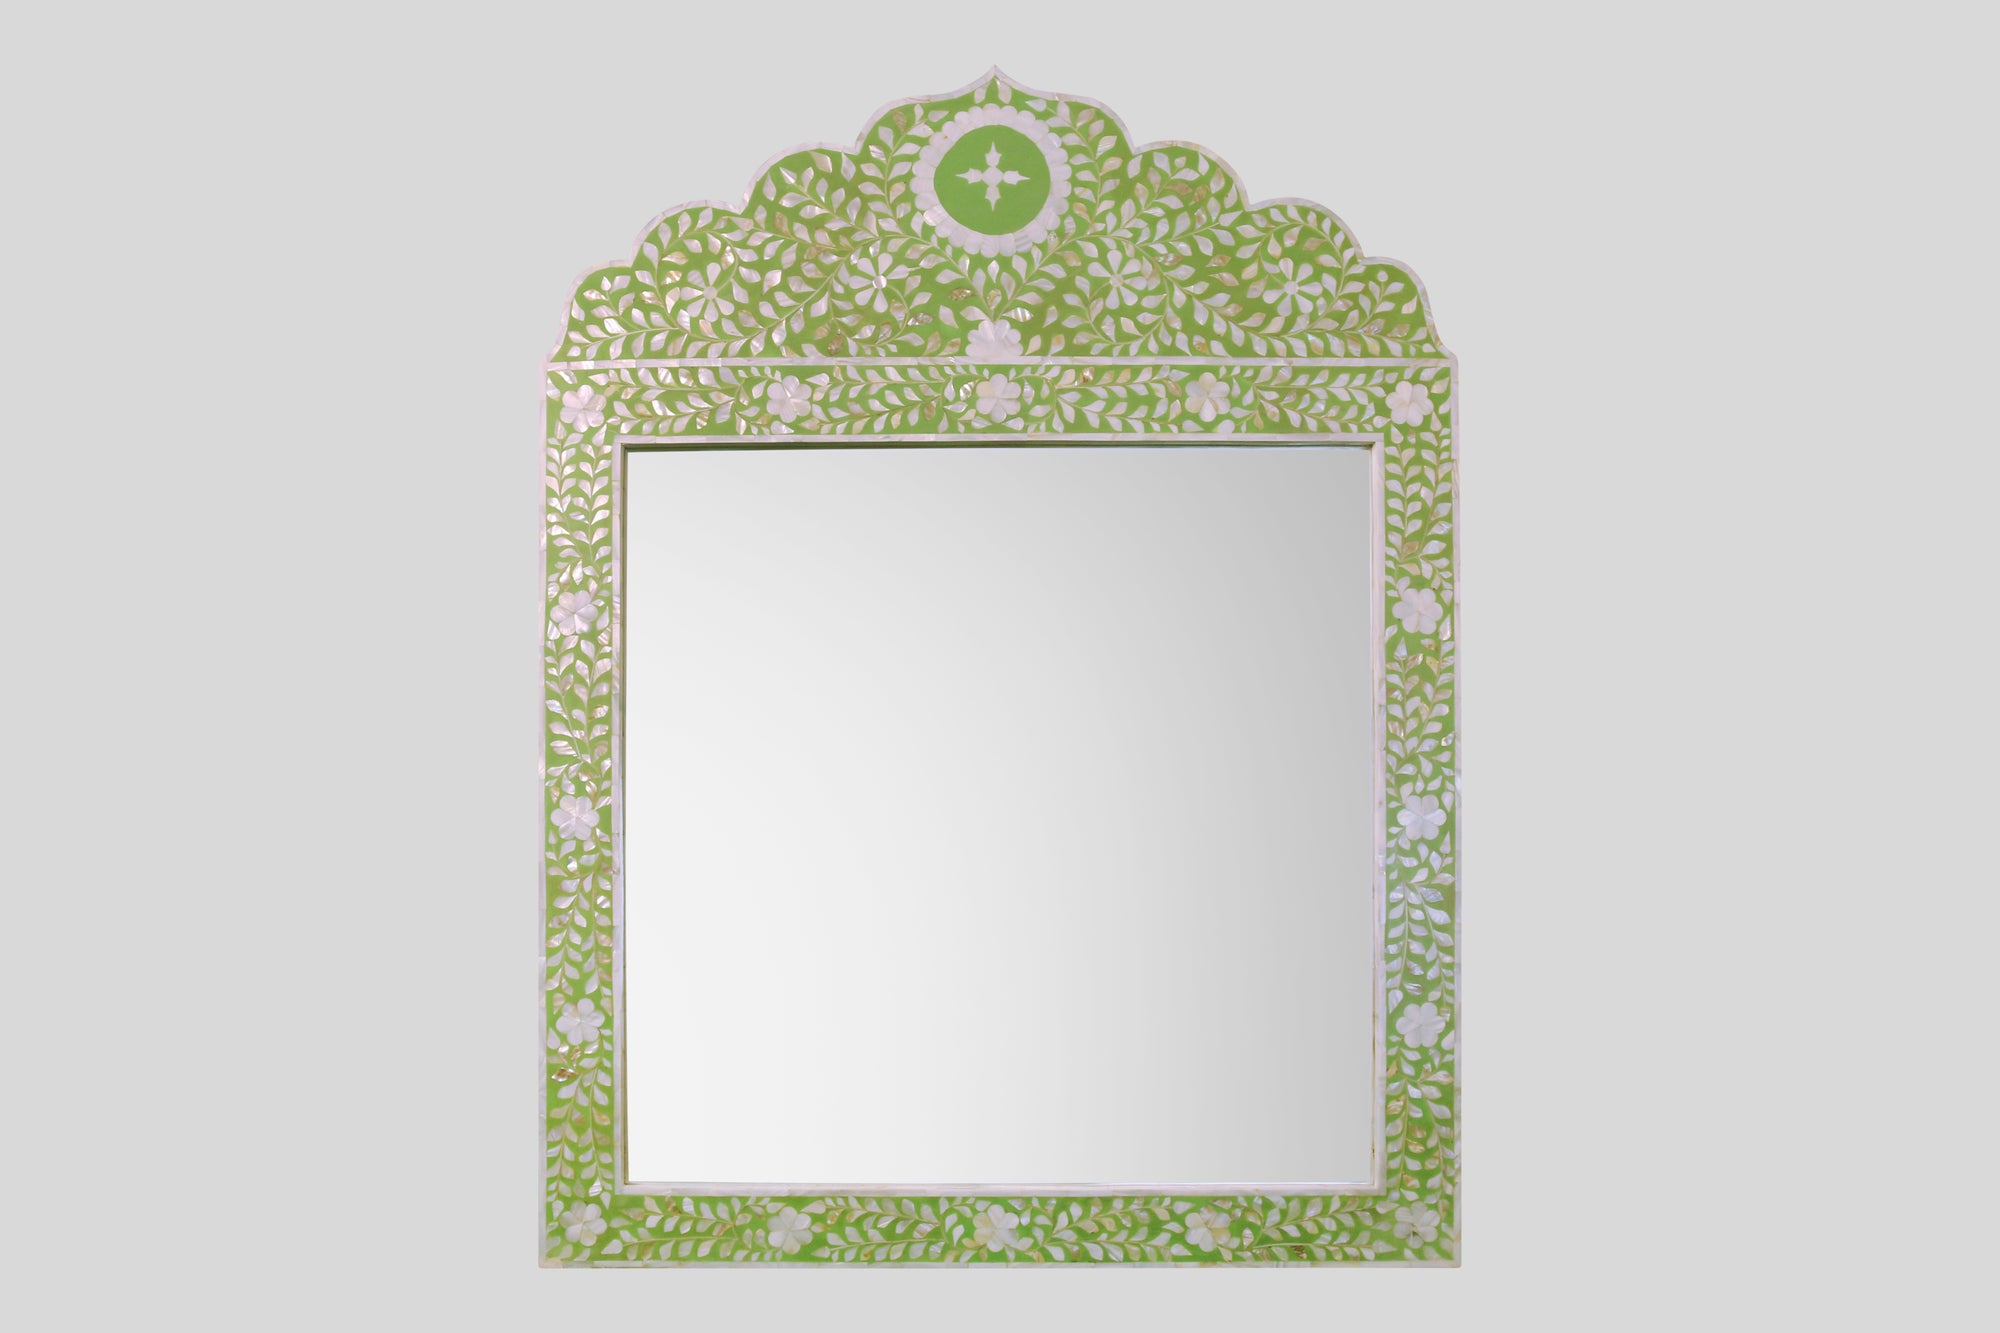 Crested Mirror with Green Inlay